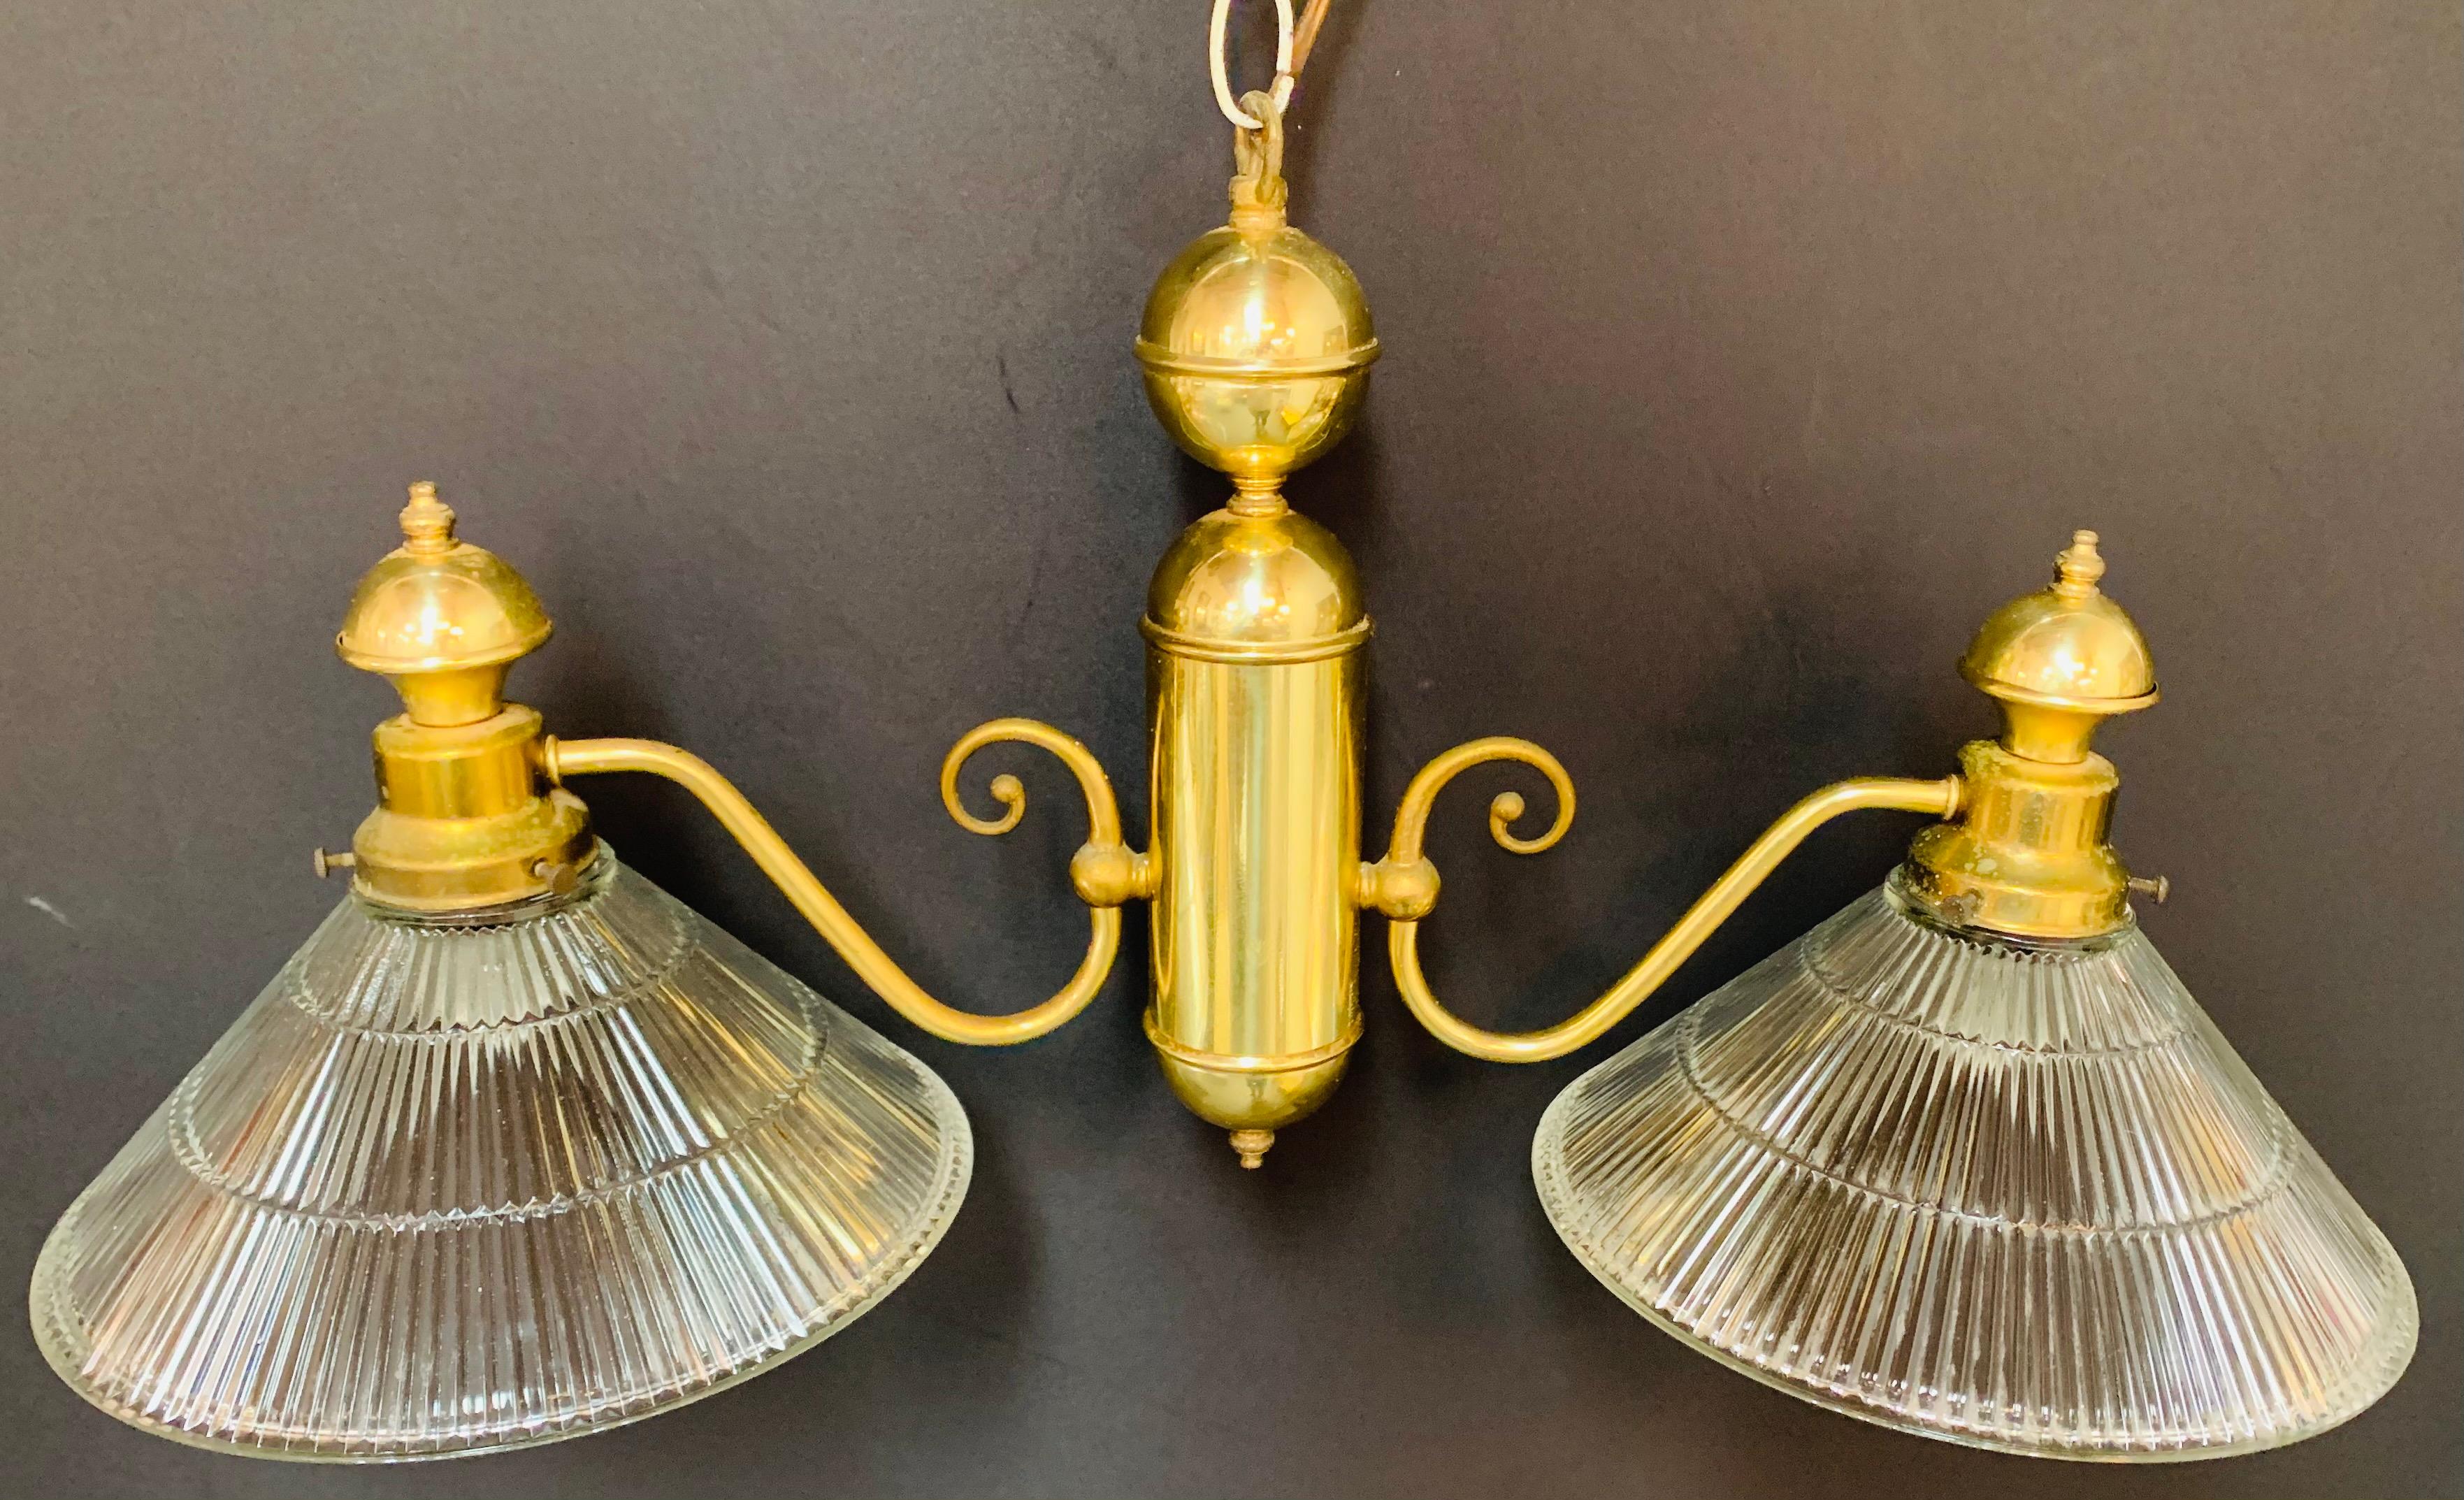 A classy and stylish Georgian style pendant or chandelier featuring two large flared glass shades facing downward. Each arm finely ends in a scroll and attached to a cylindric column. 

Dimensions: 26